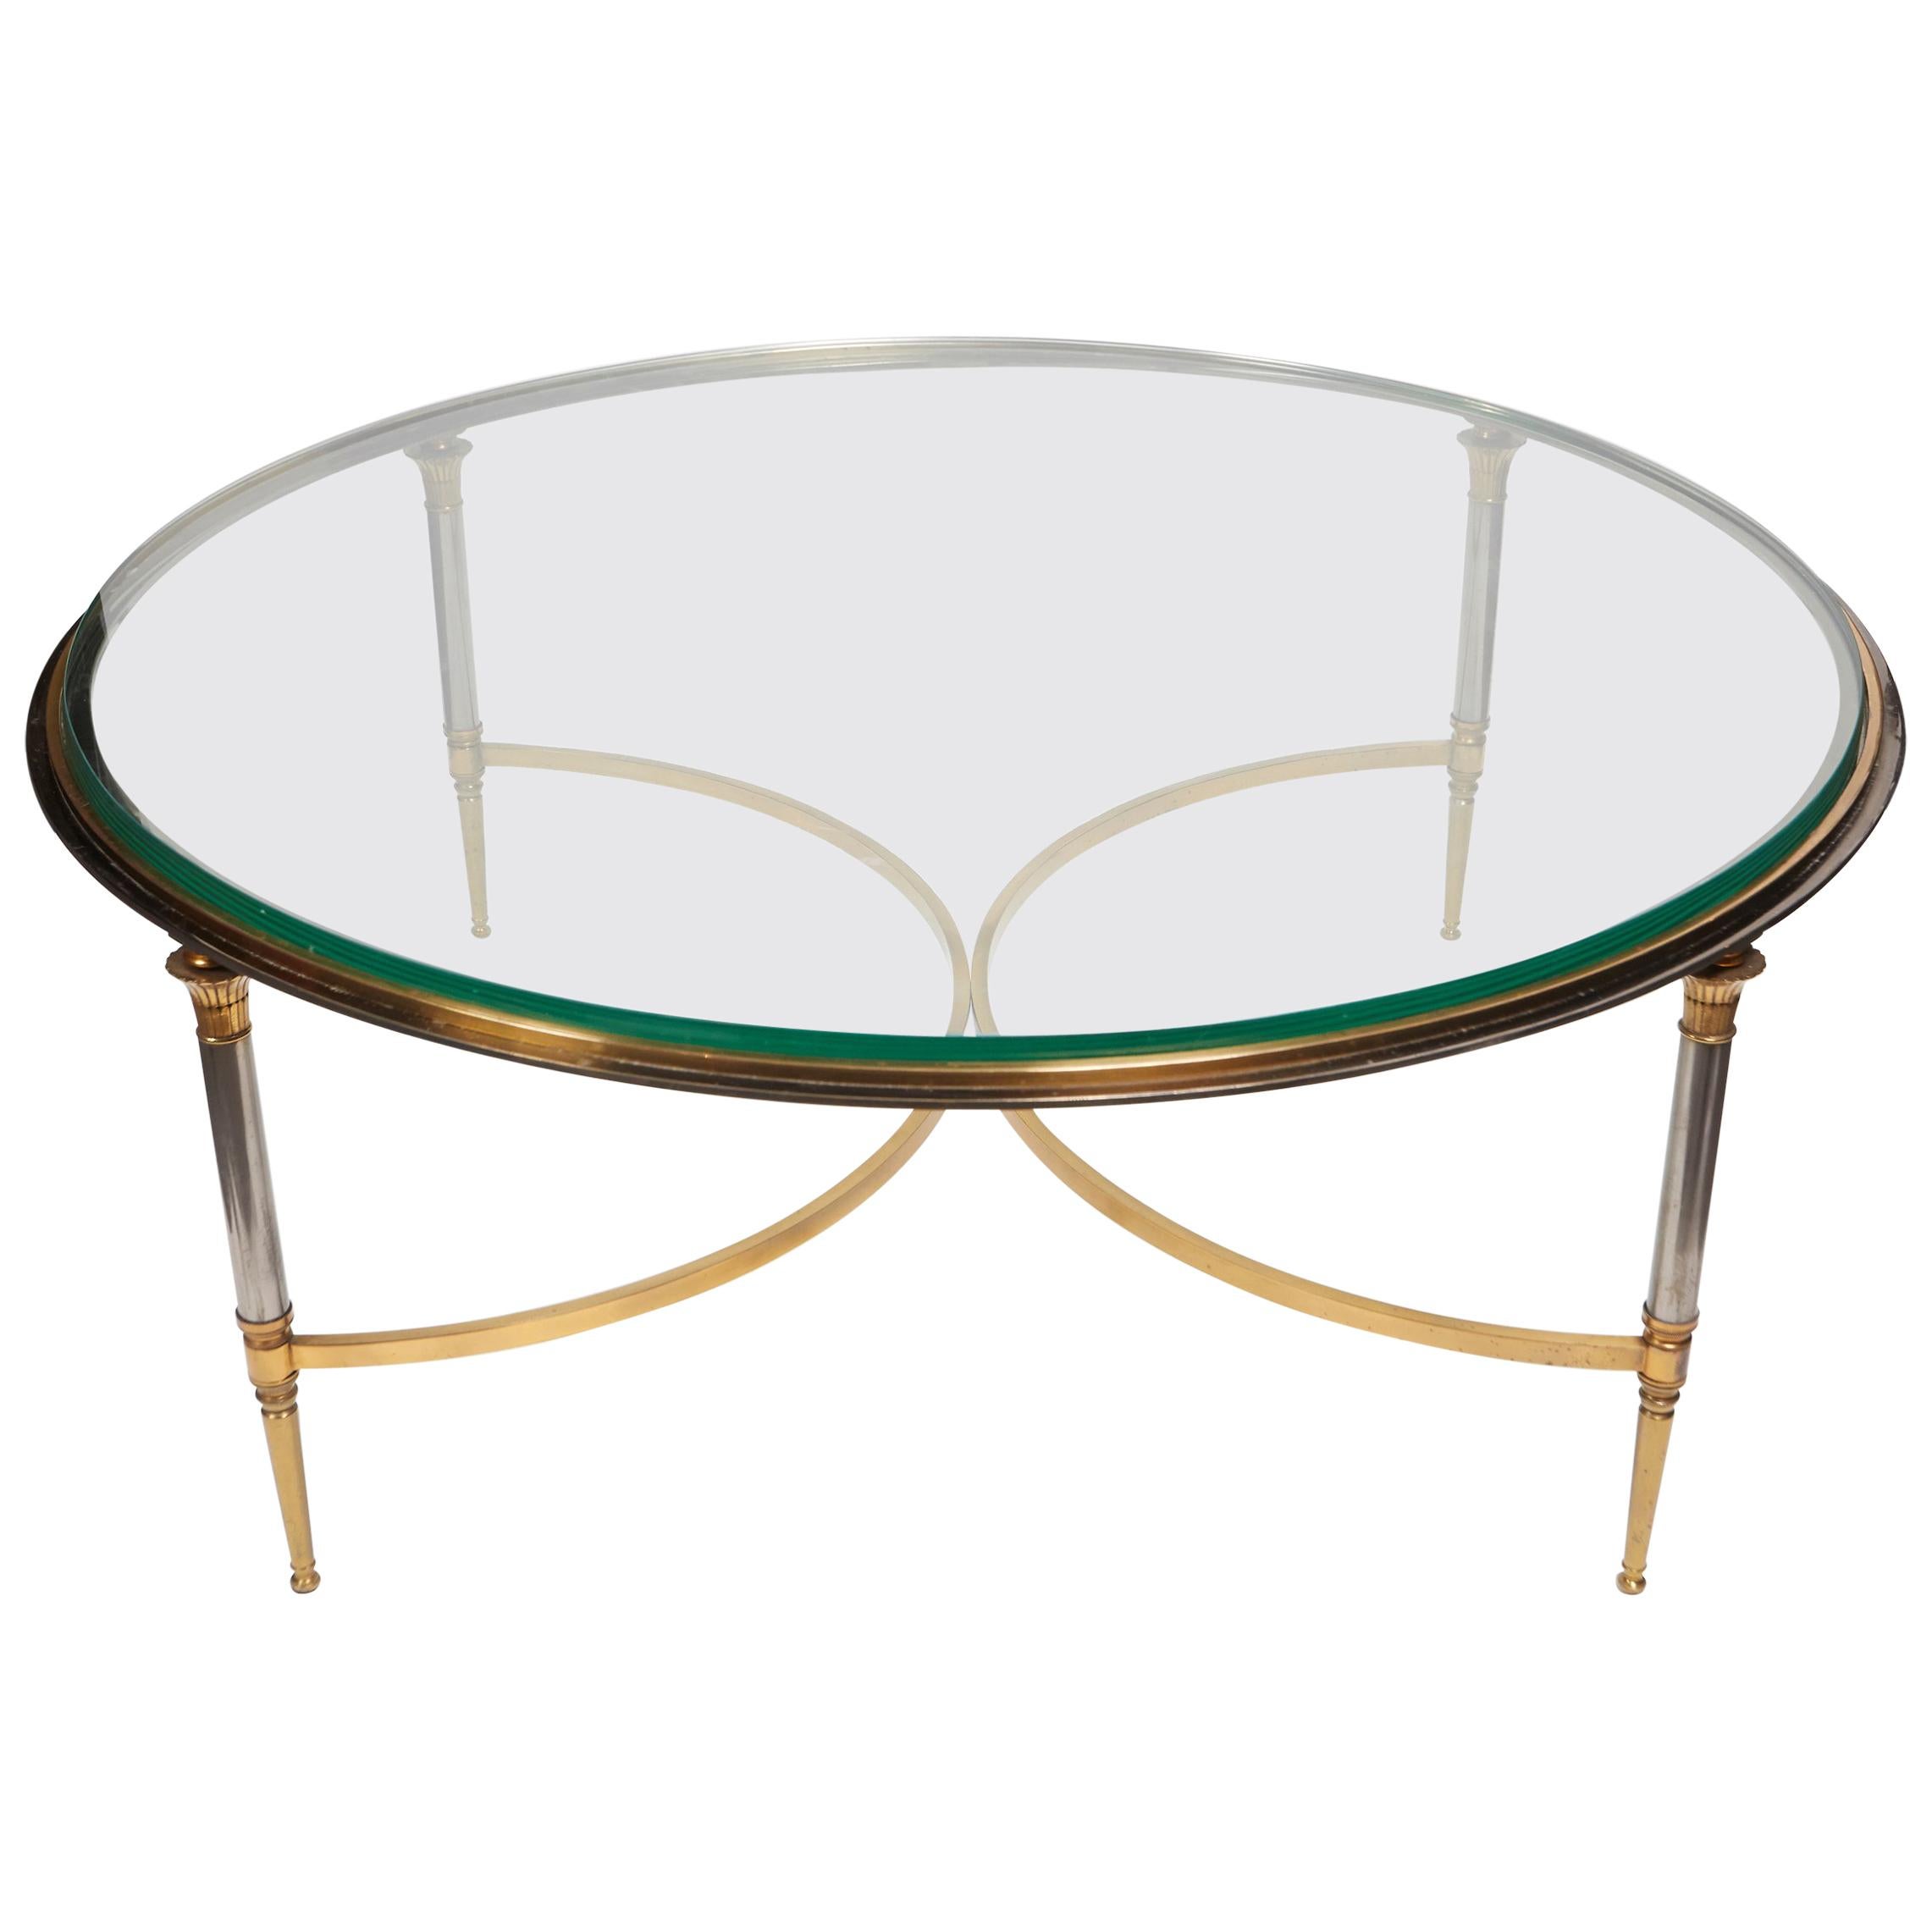 Brass and Polished Steal Coffee Table by Maison Jansen